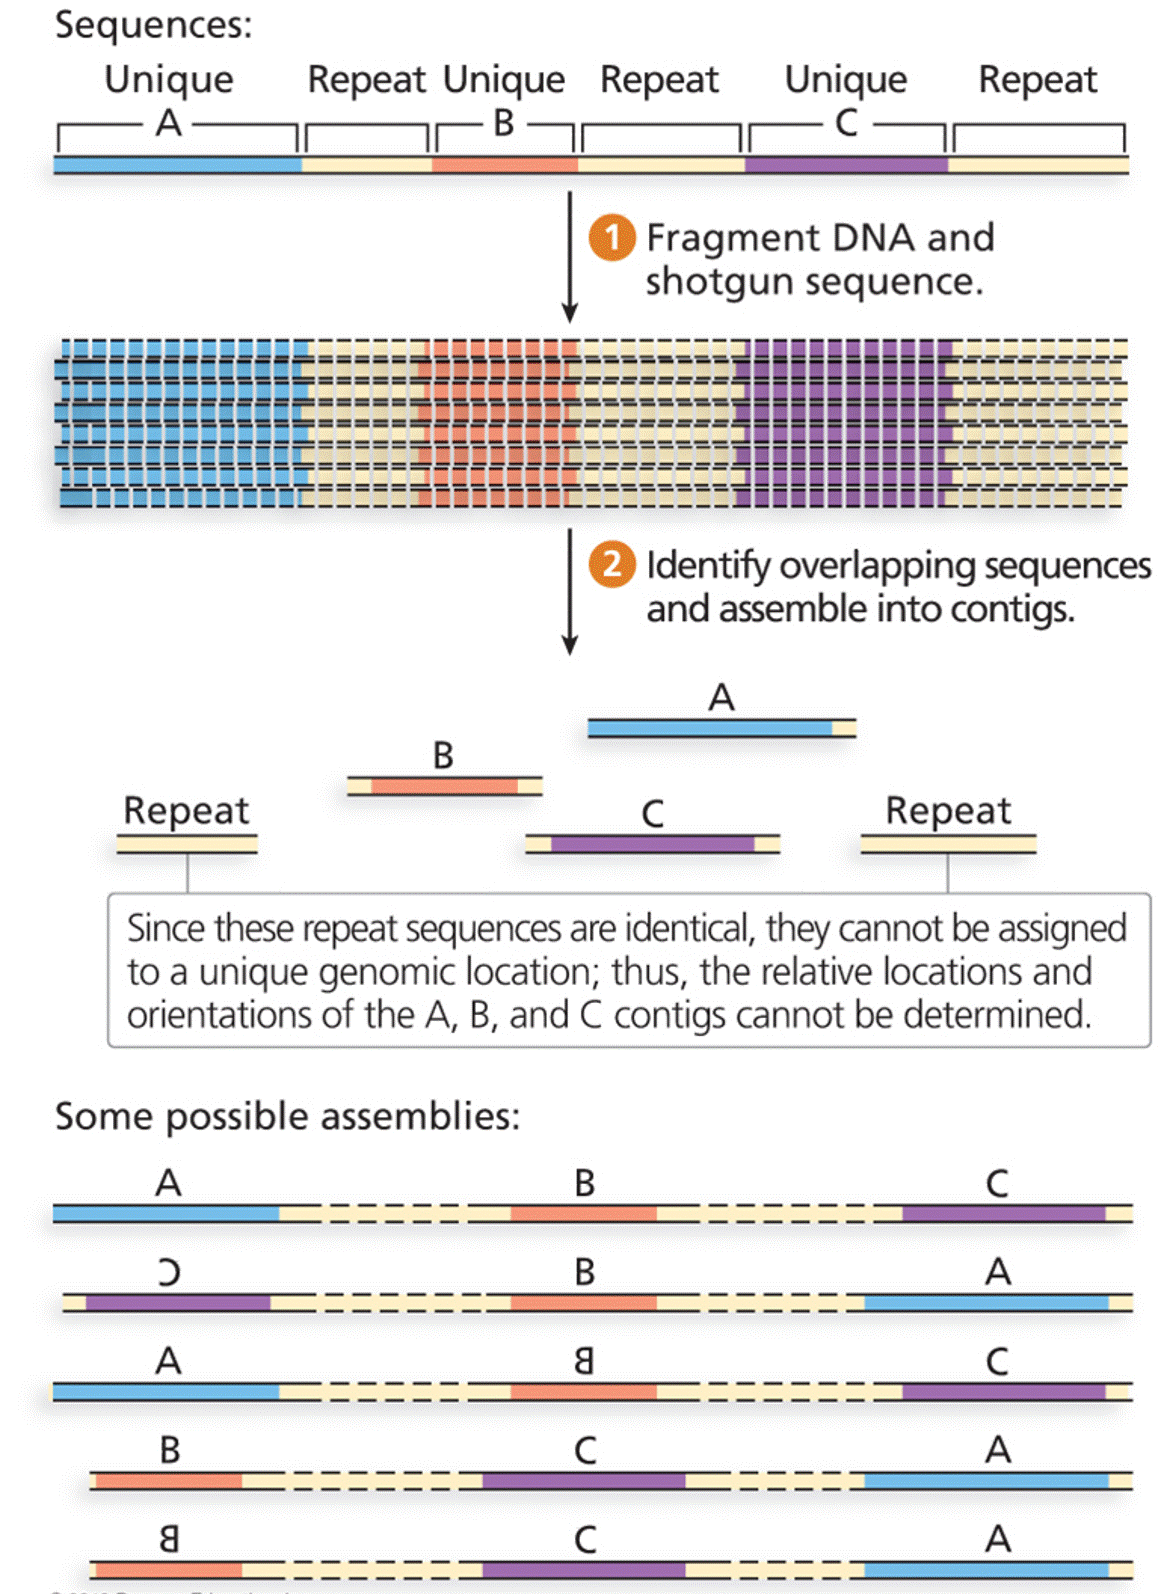 The problem of repetitive DNA